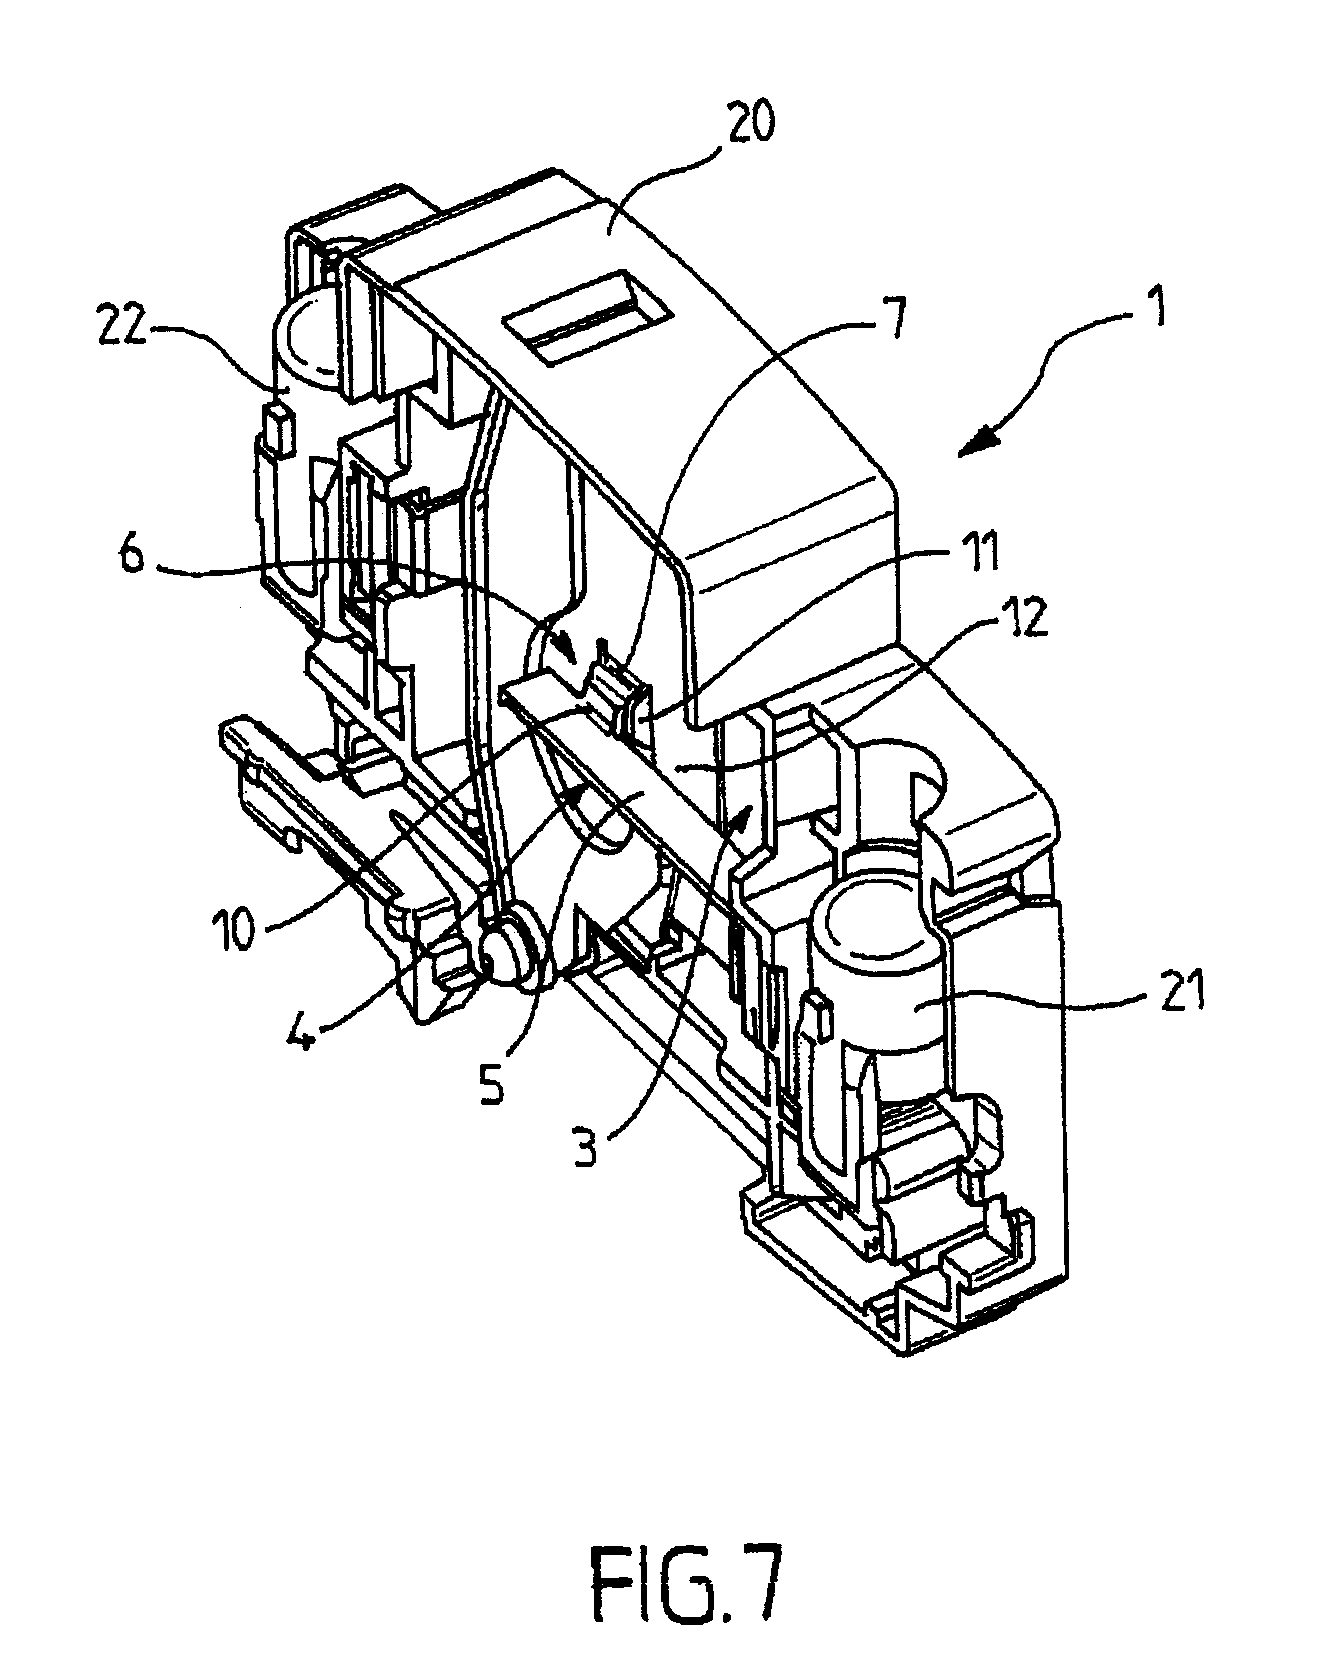 Overvoltage protection device with dual contact surface thermal disconnector